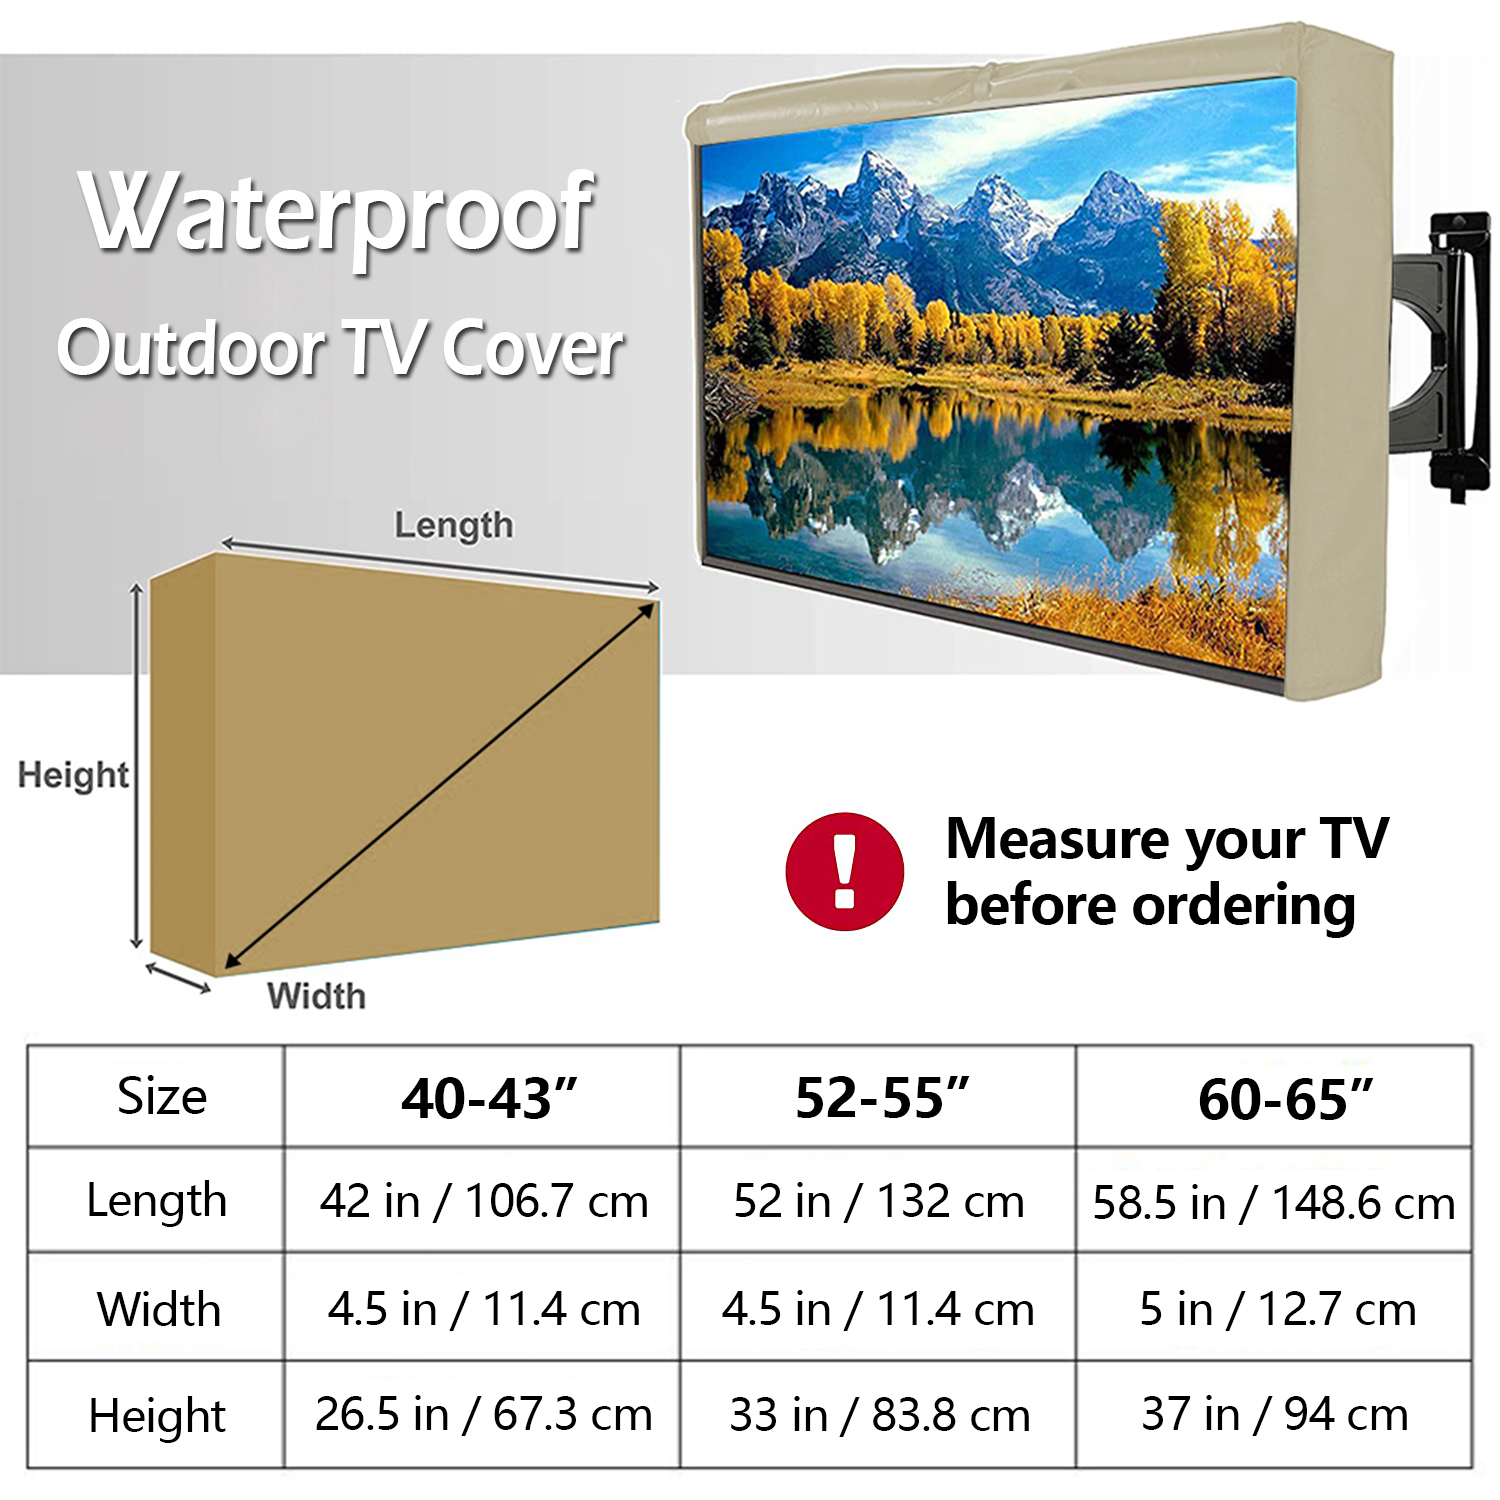 IC ICLOVER 40''-43" Outdoor Weatherproof LCD Plasma TV/Television Cover Flat Screen TV/Television Dustproof Protector with Waterproof Remote Pocket, Beige - image 3 of 9